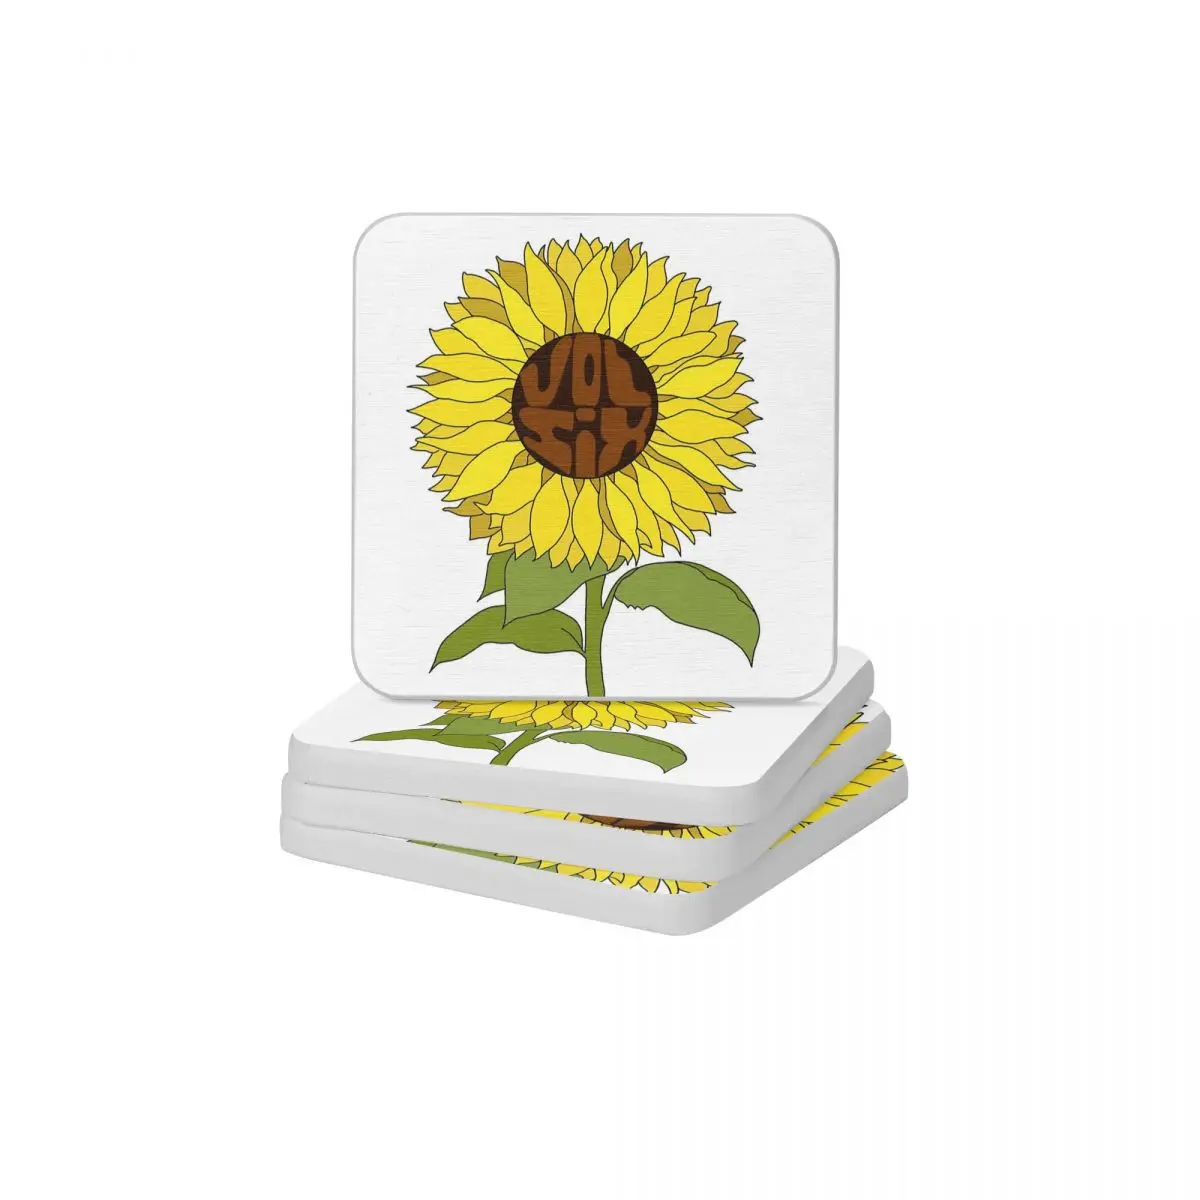 

Sunflower Diatom Square Round Coaster Water Absorption Cup Bonsai Mat Soap Toothbrush Pad 10x10cm